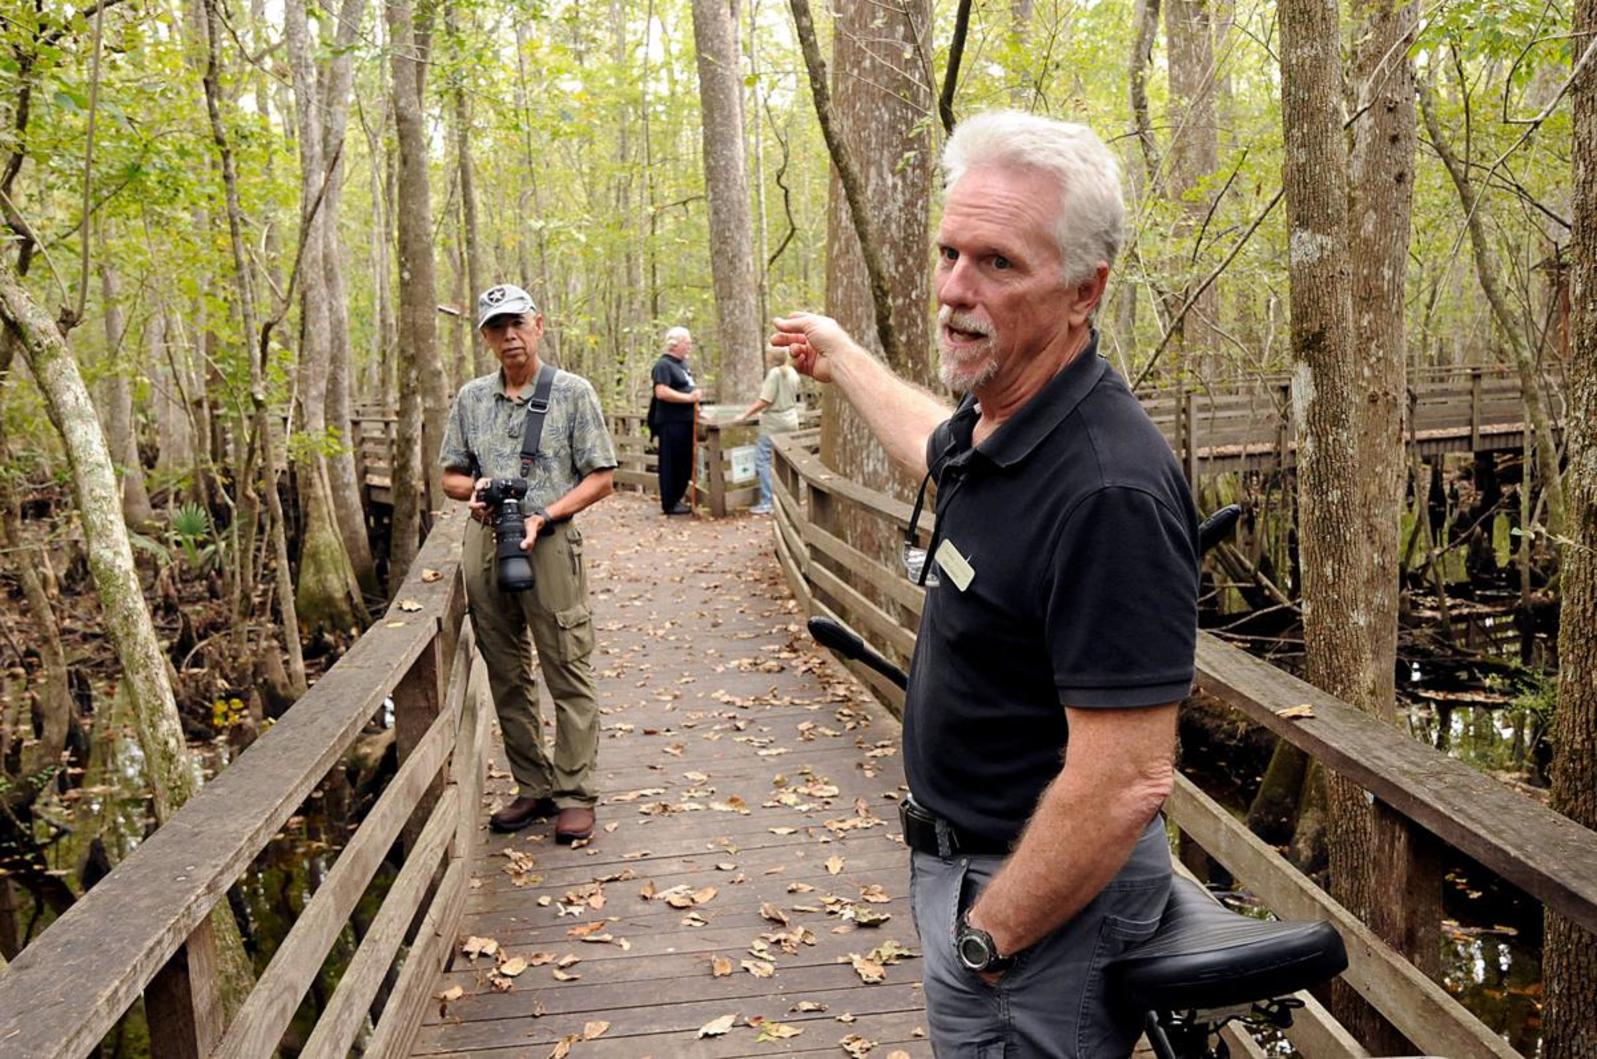 Mike Dawson answers questions from visitors on the Beidler Forest boardwalk 